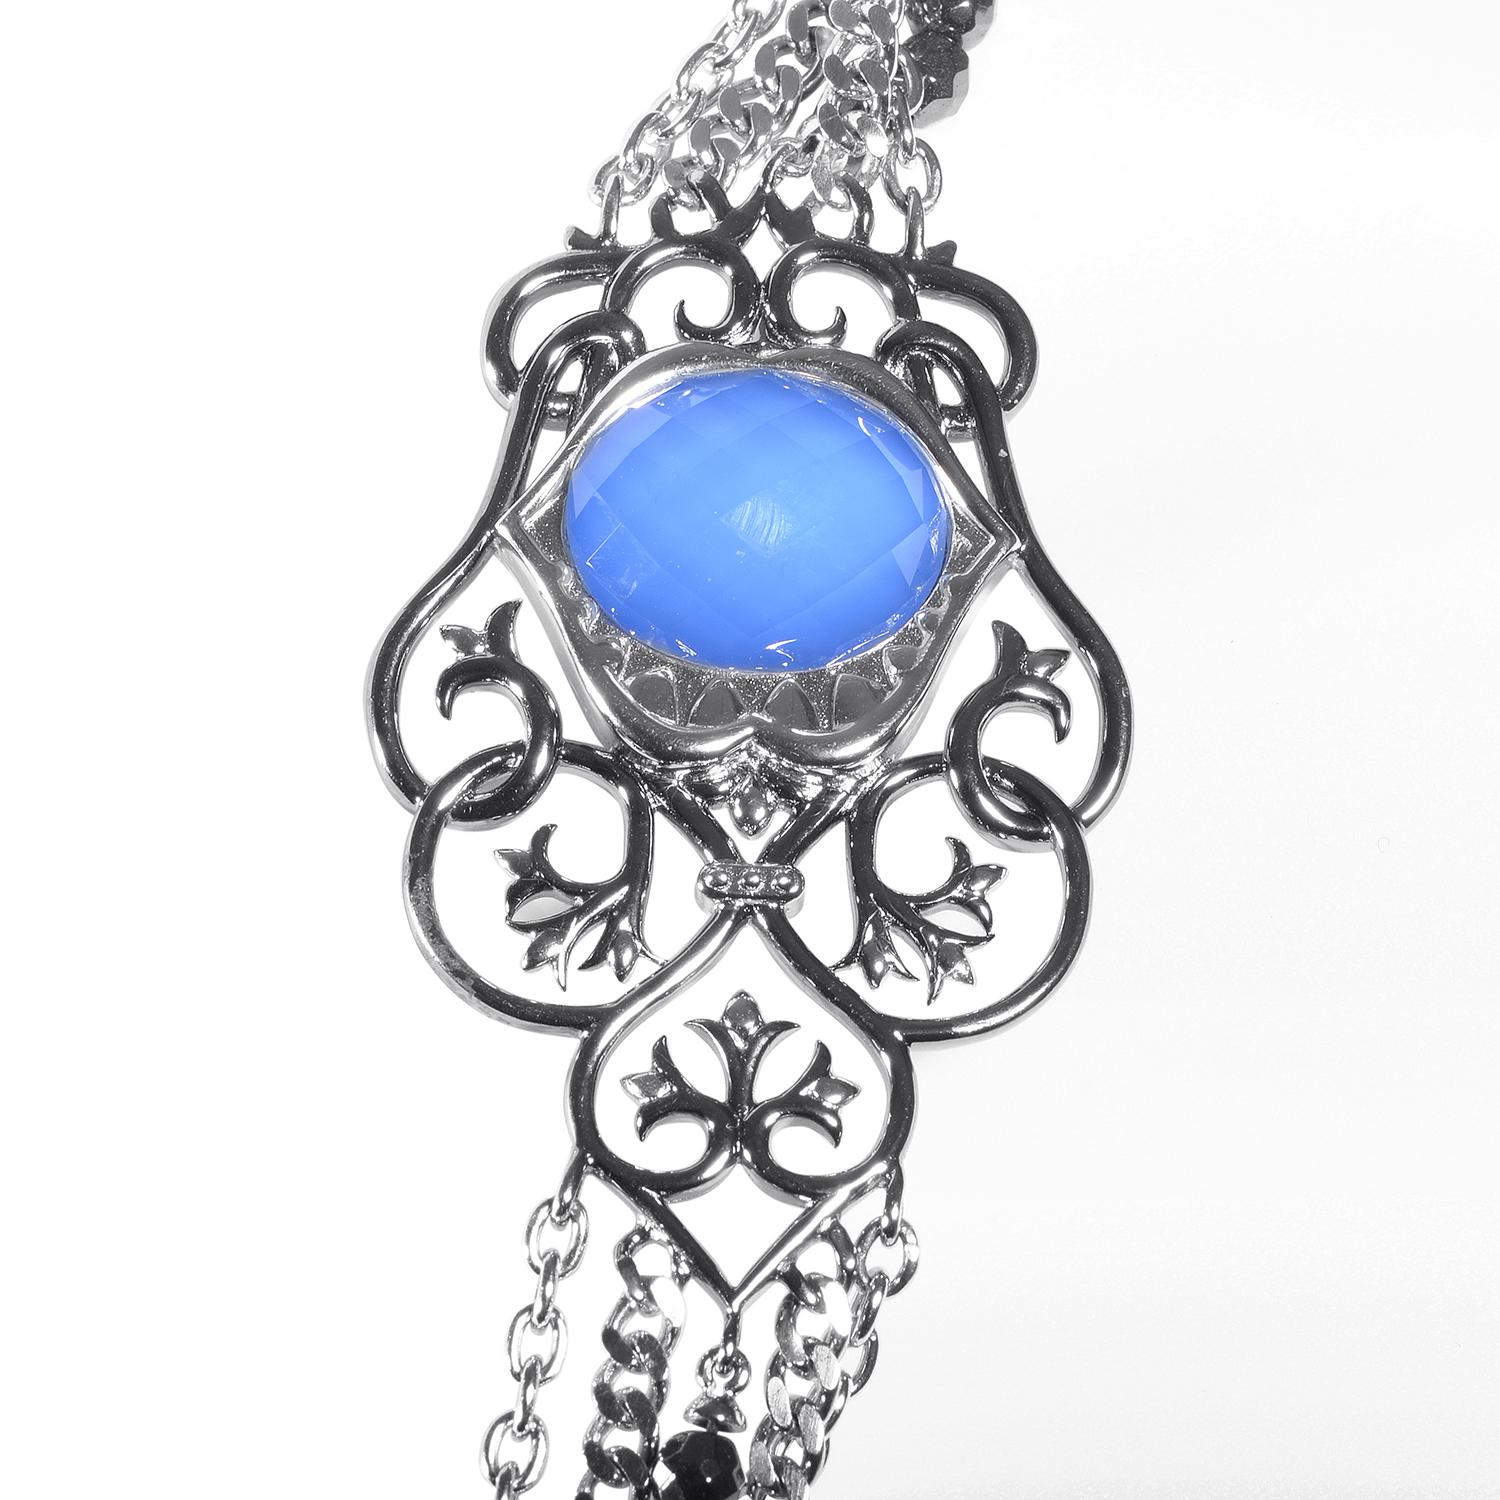 The majestic shark jaw motifs and delightful filigree patterns that complement the blue agate, hematite and quartz stones weighing in total 18.50 carats produce a spell-binding effect in this marvelous necklace of the highly revered Les Dents De La